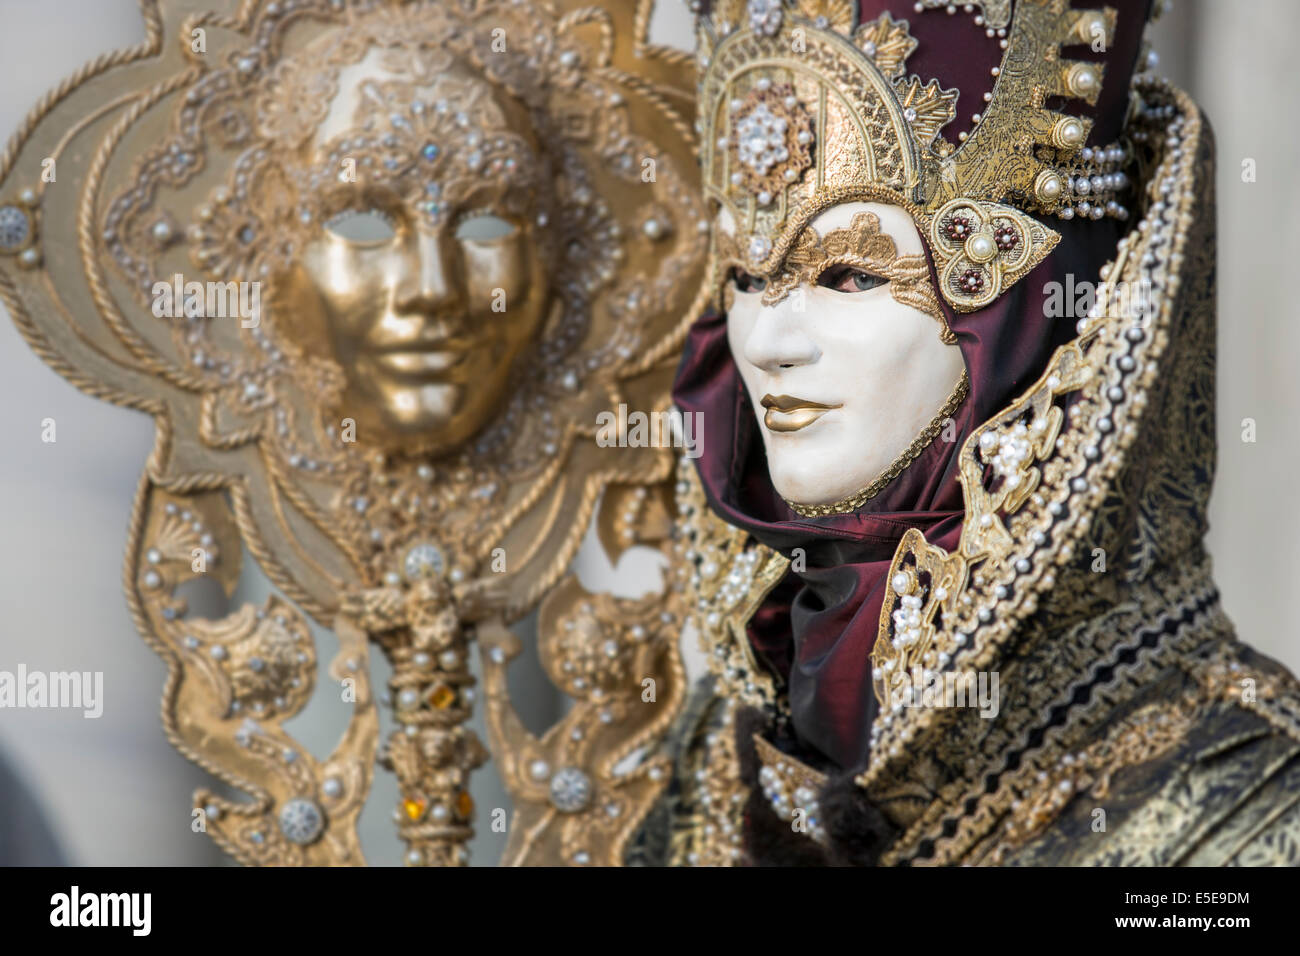 Man in black and gold elaborate Carnival costume carrying life sized mask on staff in St. Mark's Square, Venice. Stock Photo